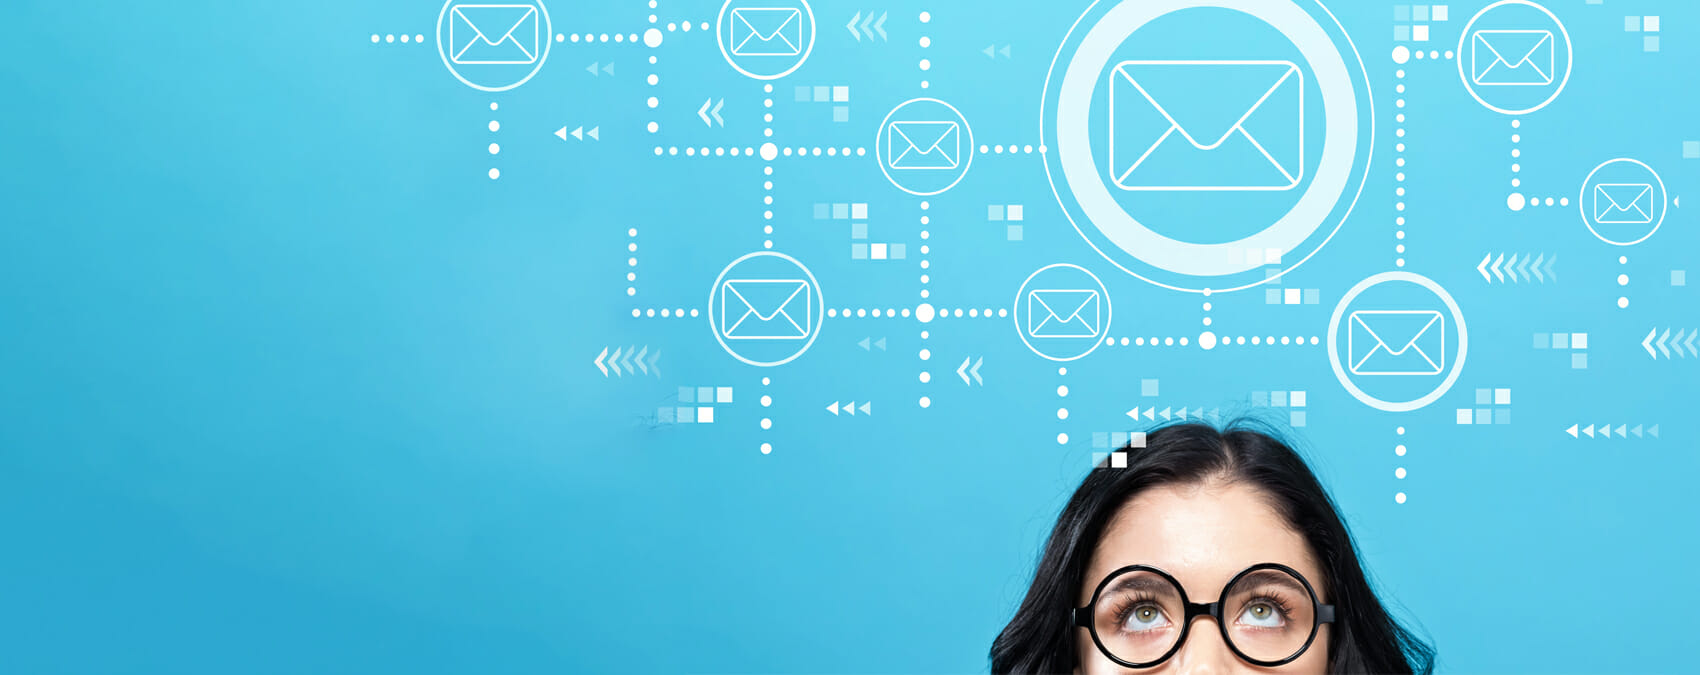 Woman in glasses looks up at email symbols floating above her head